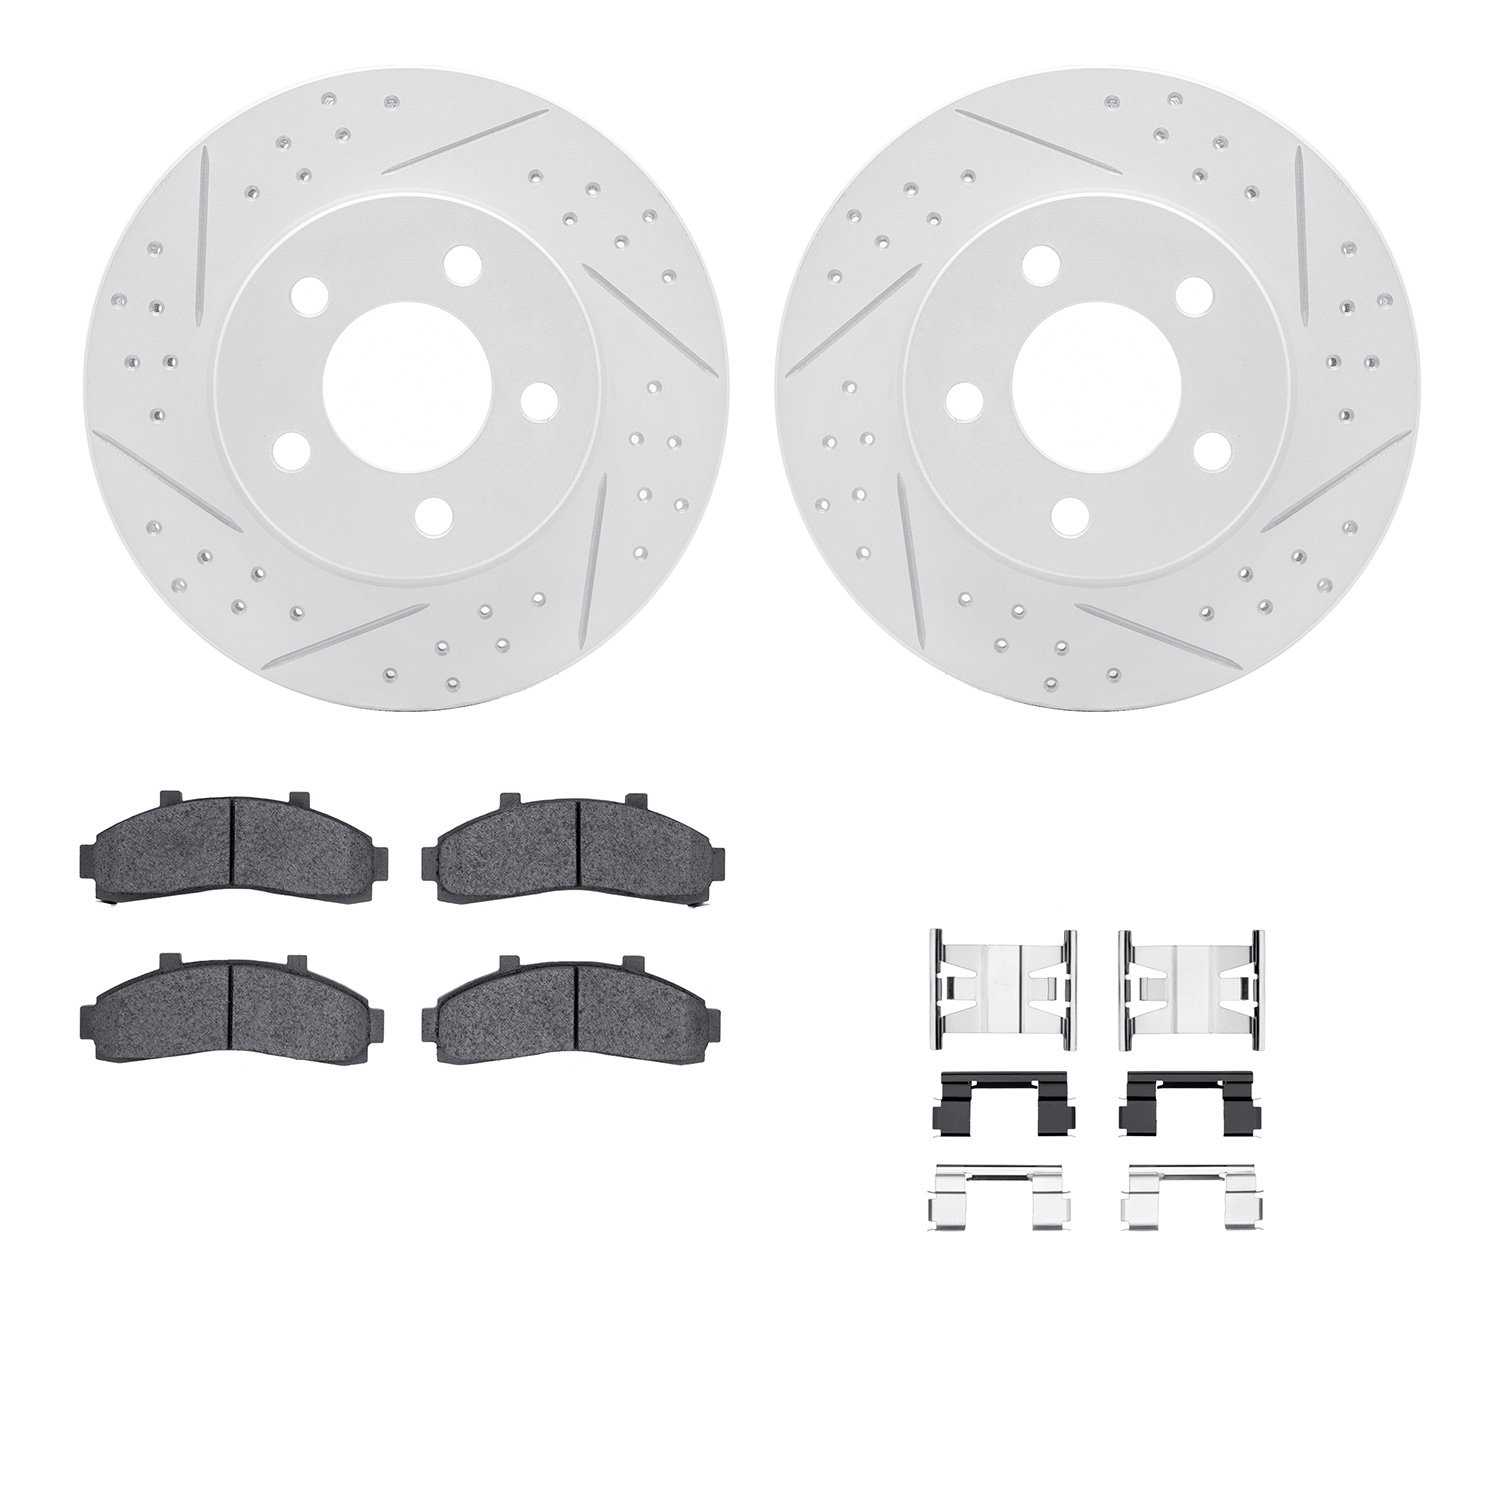 2212-99091 Geoperformance Drilled/Slotted Rotors w/Heavy-Duty Pads Kit & Hardware, 1995-2002 Ford/Lincoln/Mercury/Mazda, Positio